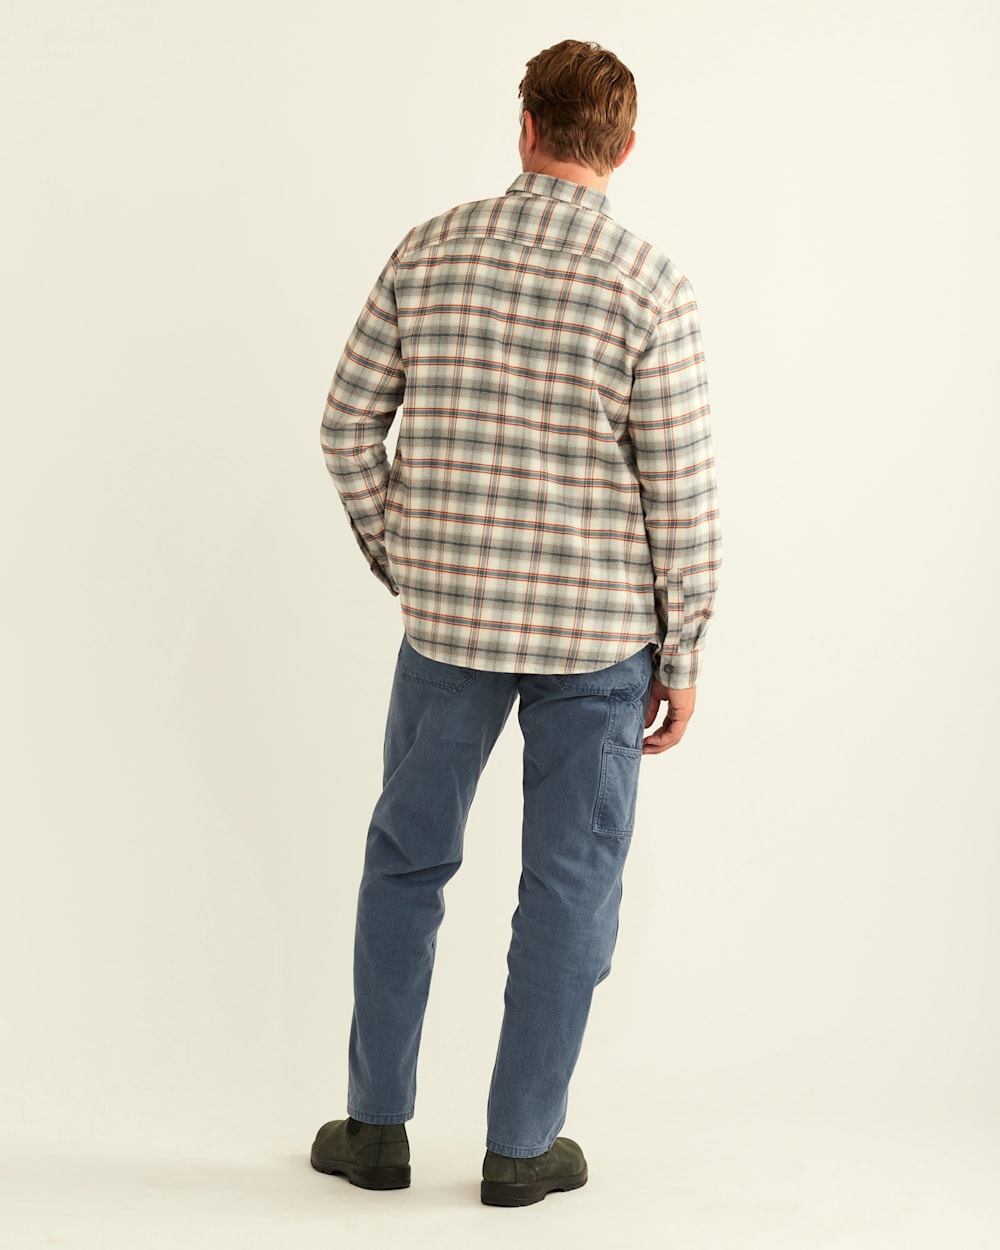 ALTERNATE VIEW OF MEN'S PLAID BURNSIDE DOUBLE-BRUSHED FLANNEL SHIRT IN BIRCH/GREY/RED PLAID image number 3